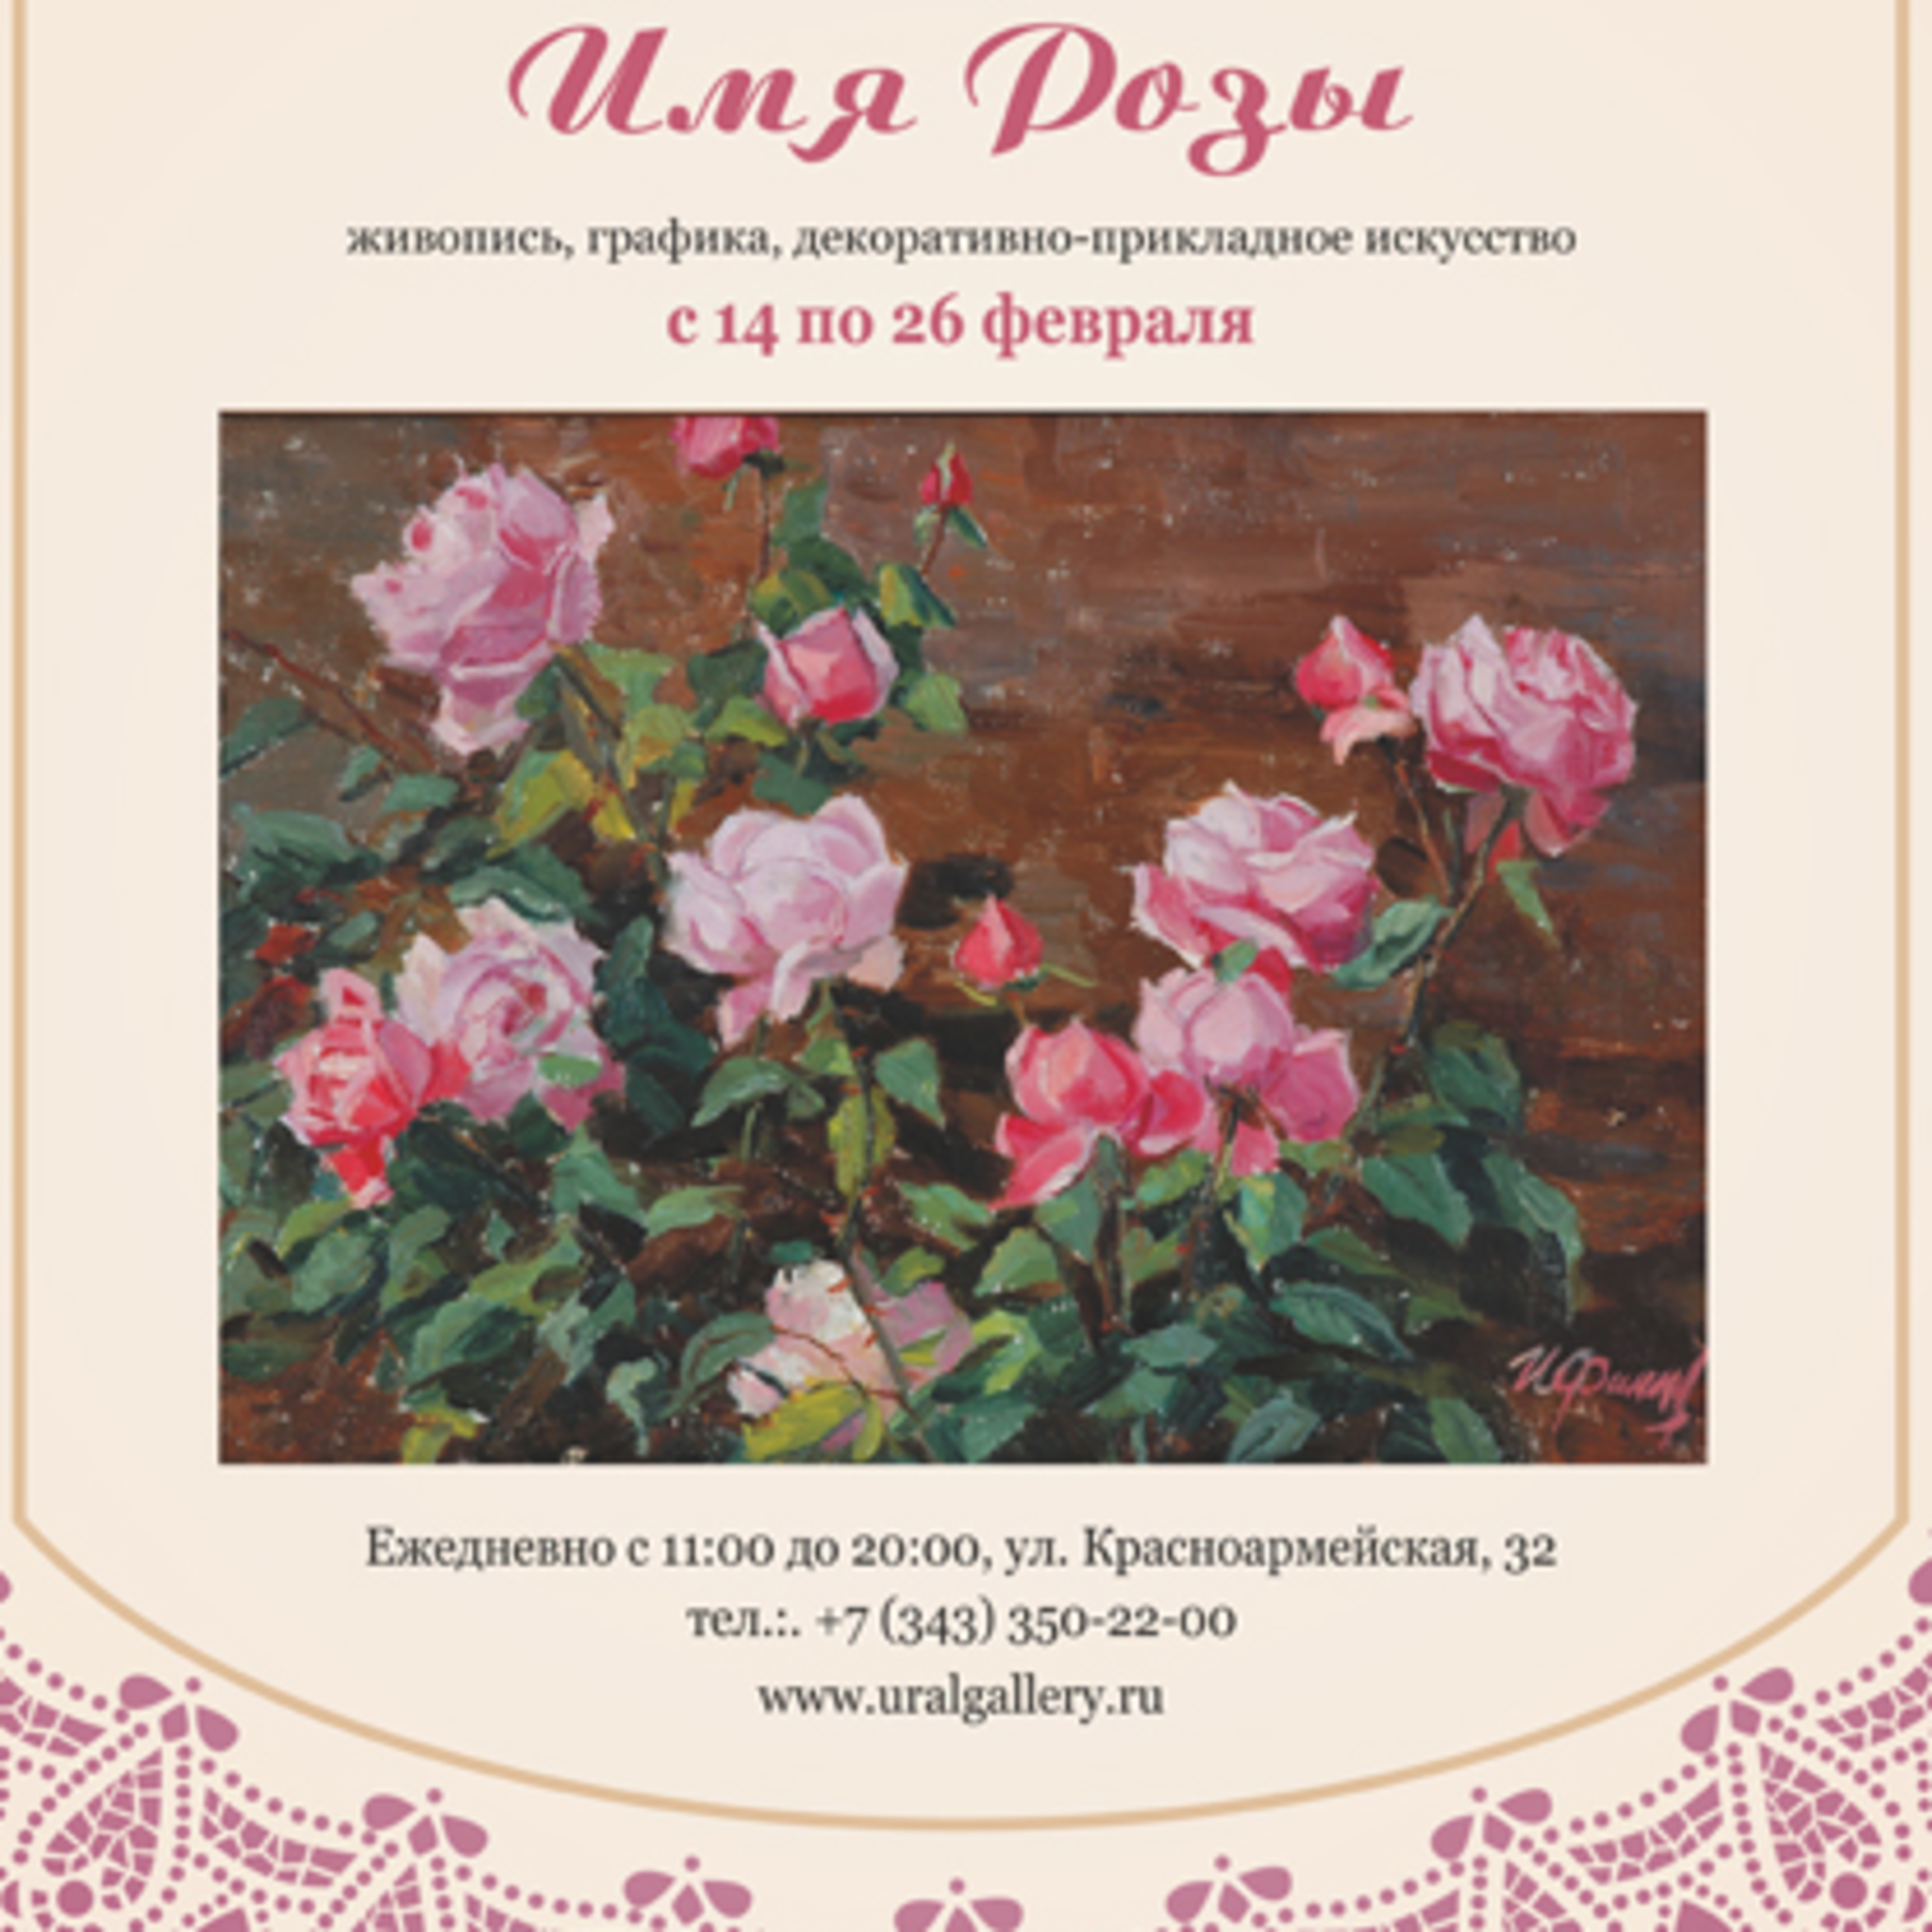 The exhibition Name of the Rose